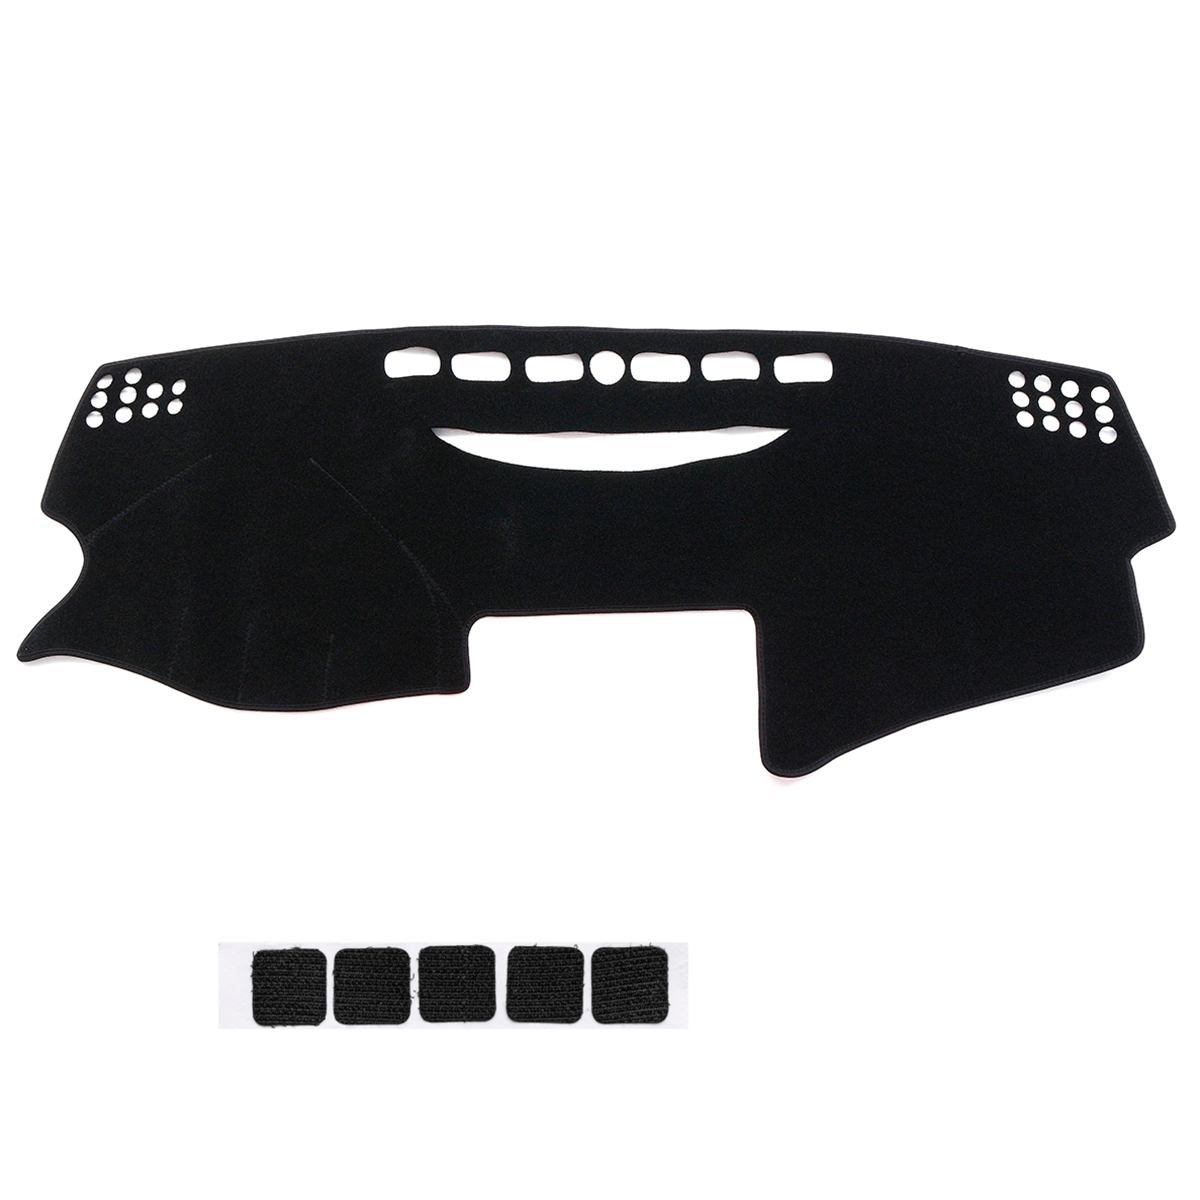 Zwart Linkerhand Antislip Auto Dash Mat Dashboard Cover Pad voor Toyota Camry 2007 auto Styling Accessoires